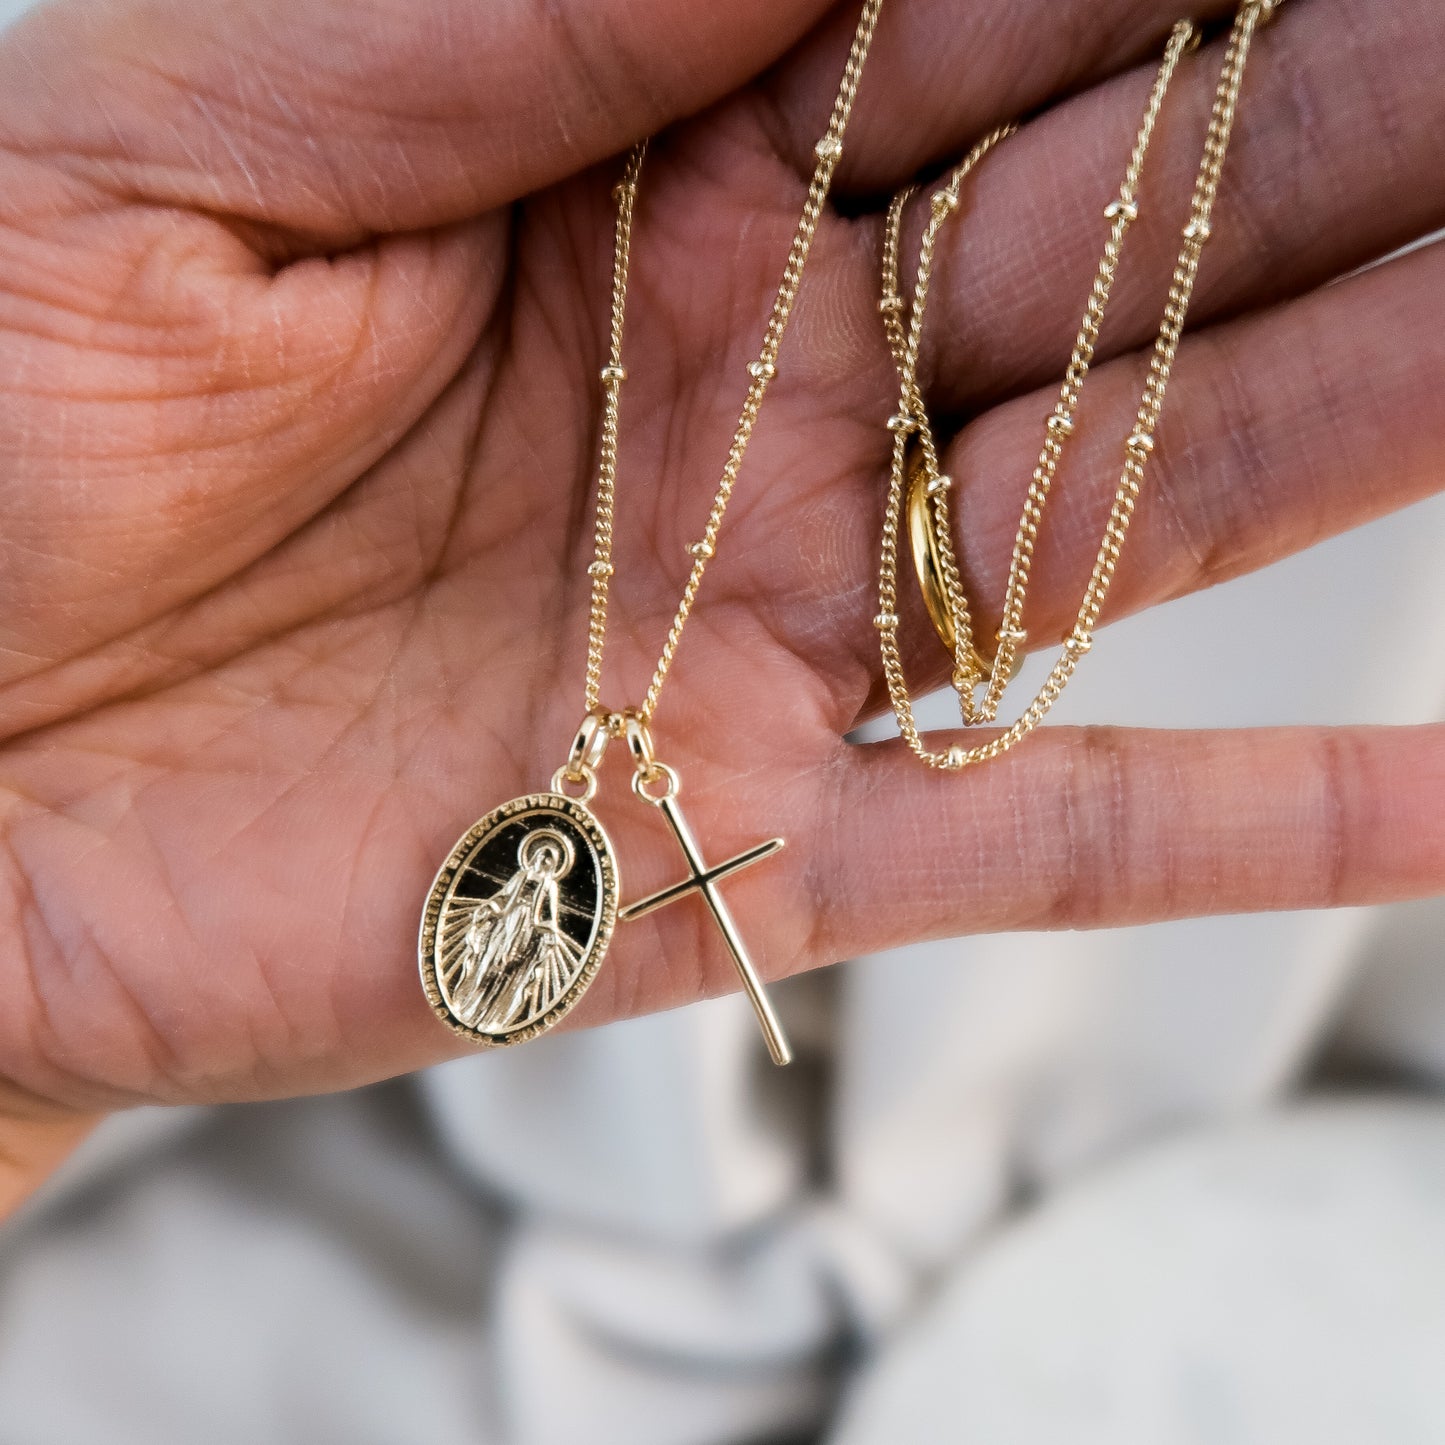 miraculous-medal-and-dainty-cross-chain-gold-filled-necklace-catholic-religious-jewelry-women-